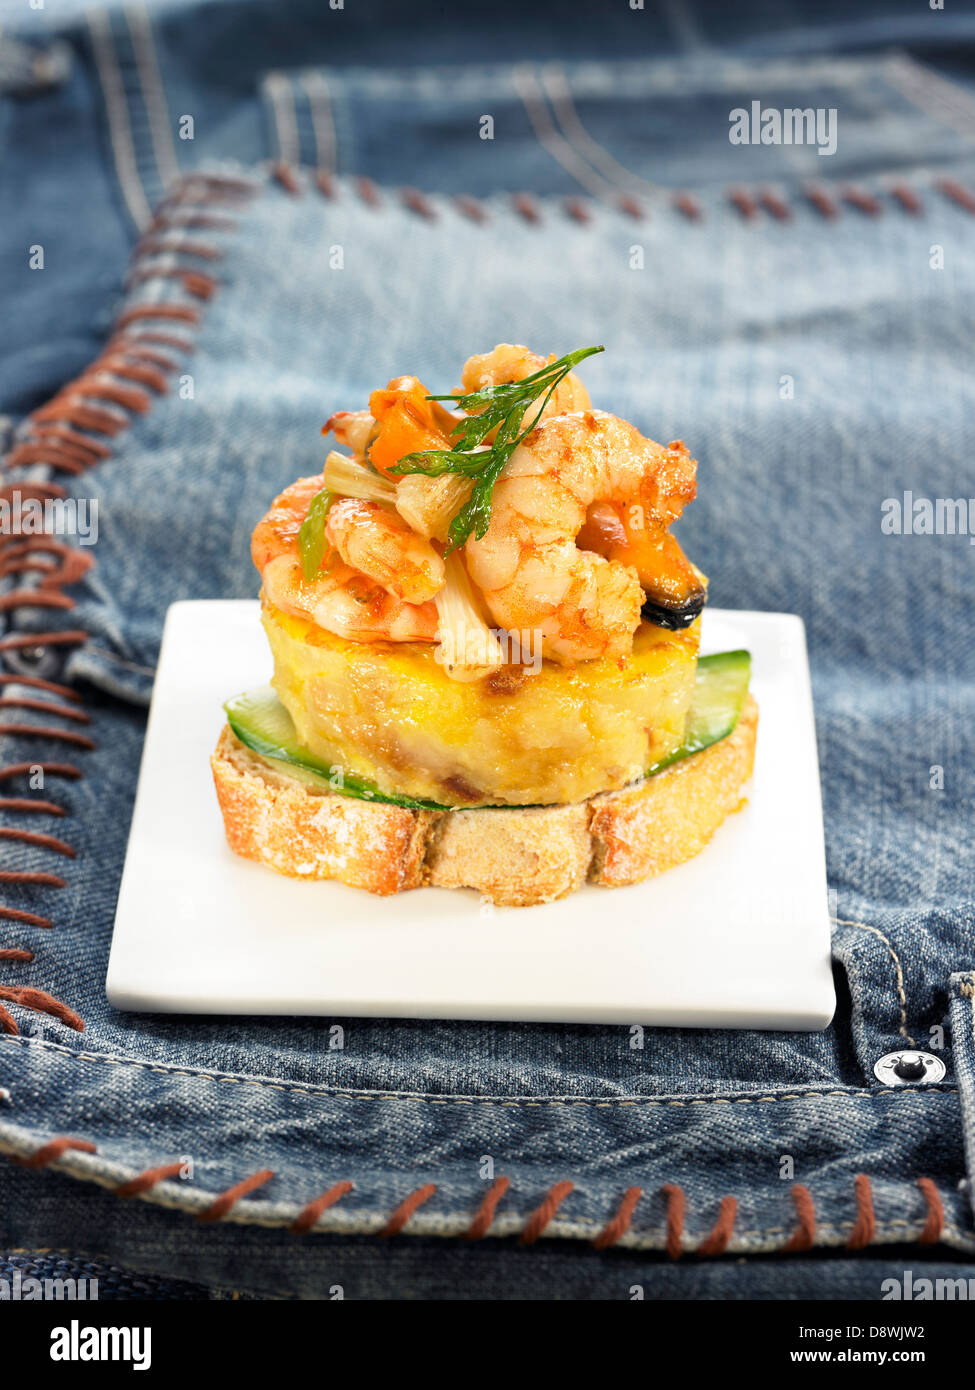 Shrimp,mild garlic and fennel omelette on a slice of bread Stock Photo